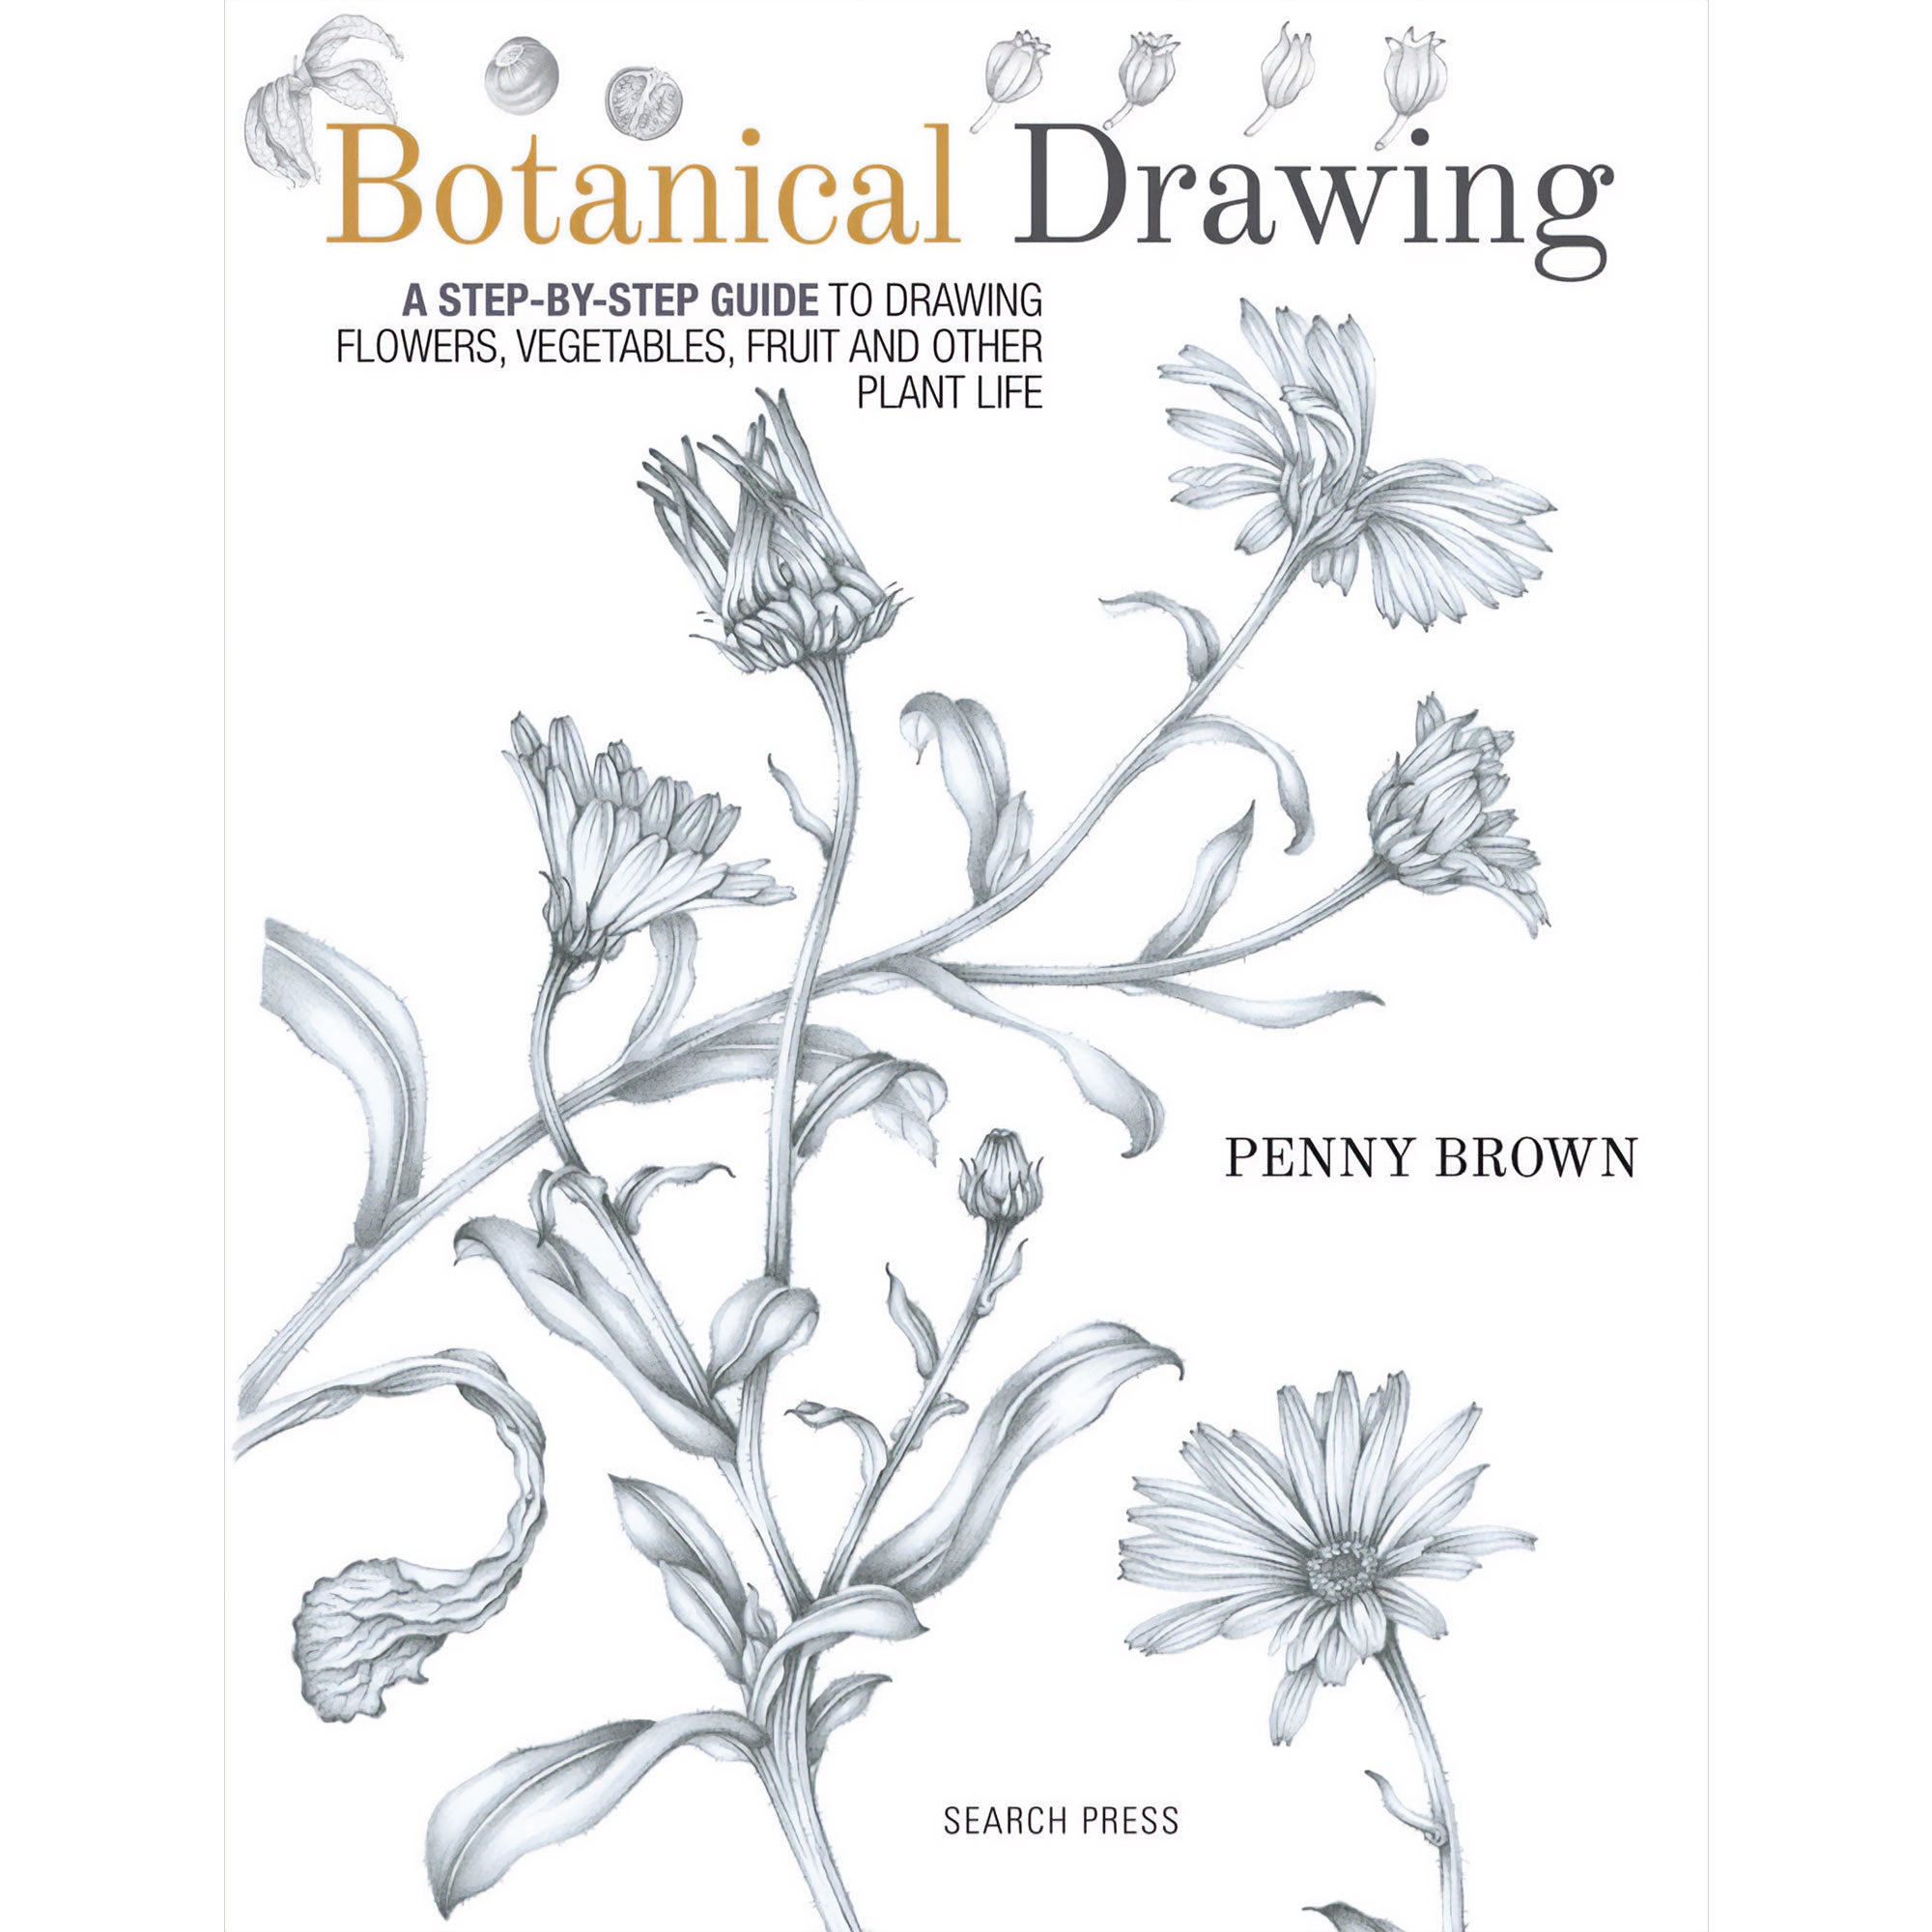 Botanical Drawing - Penny Brown Book Cover